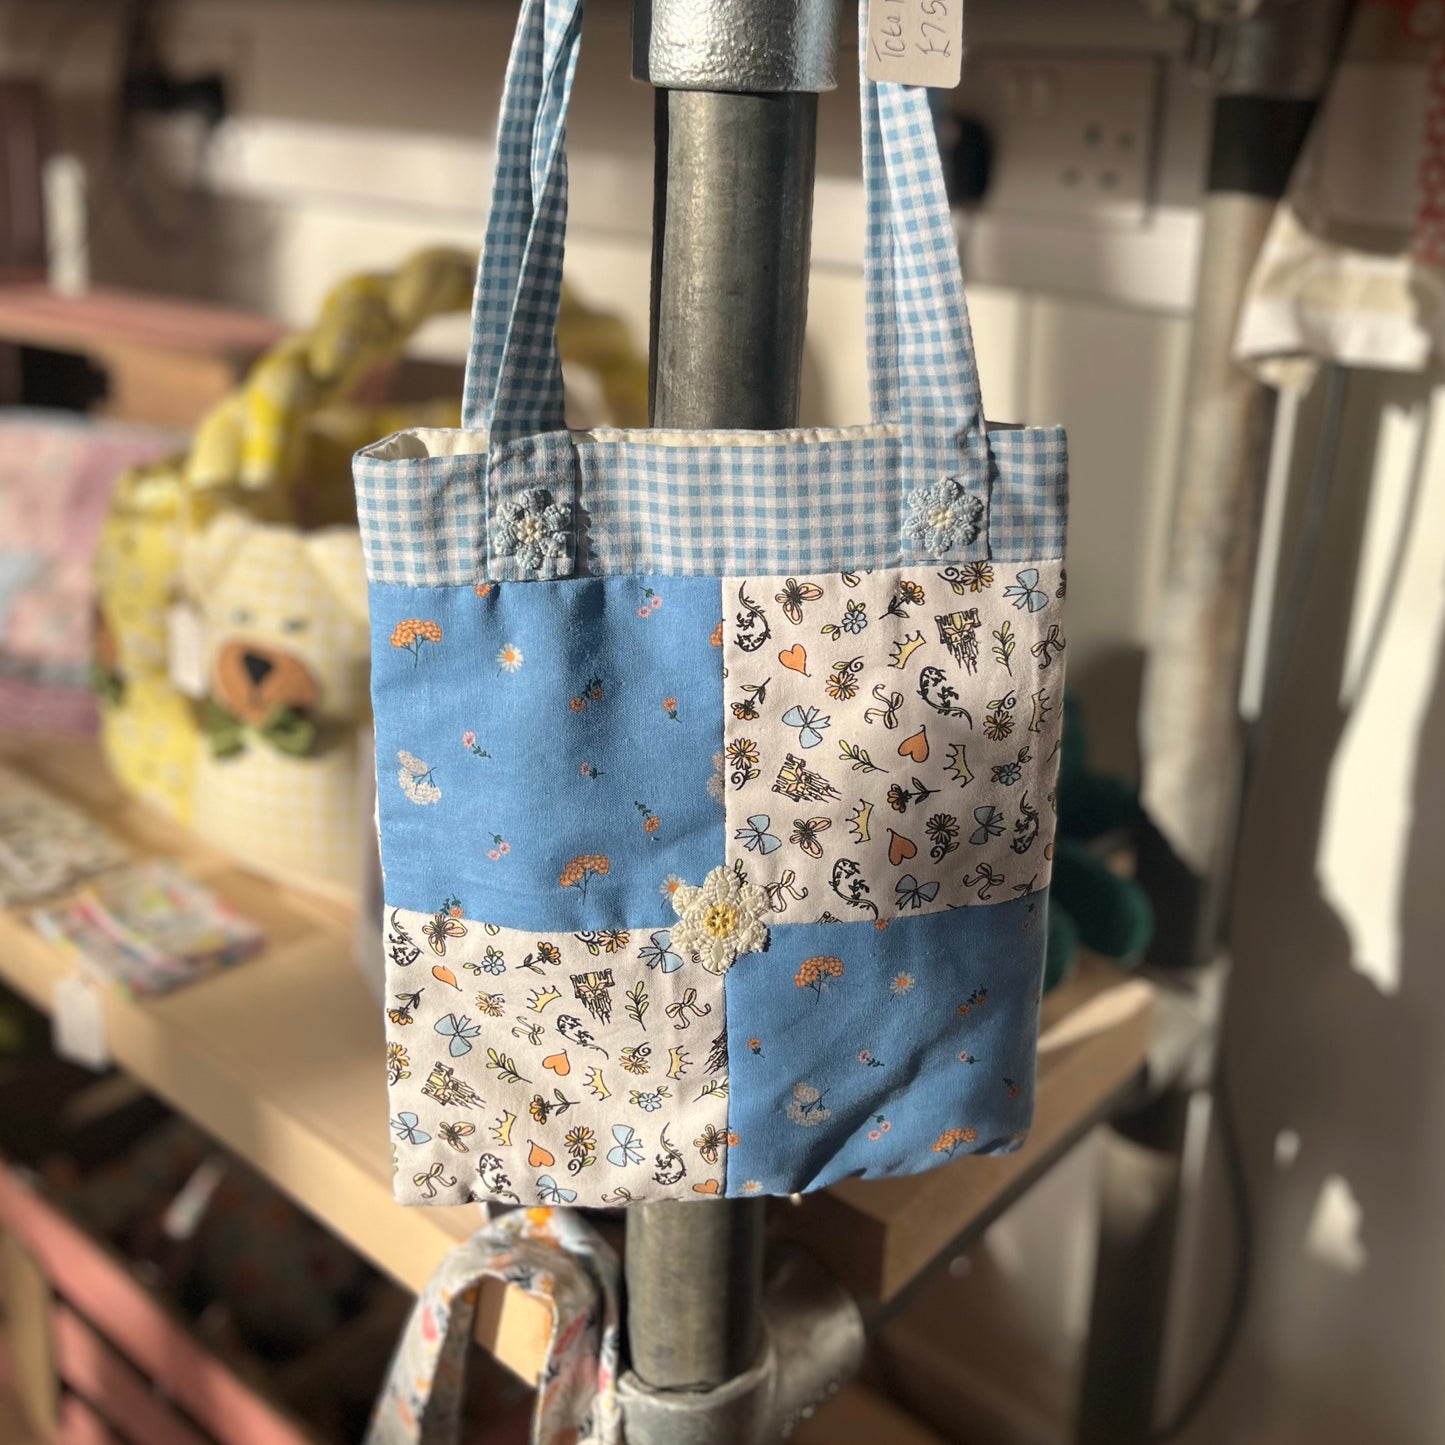 Patterned Tote Bags